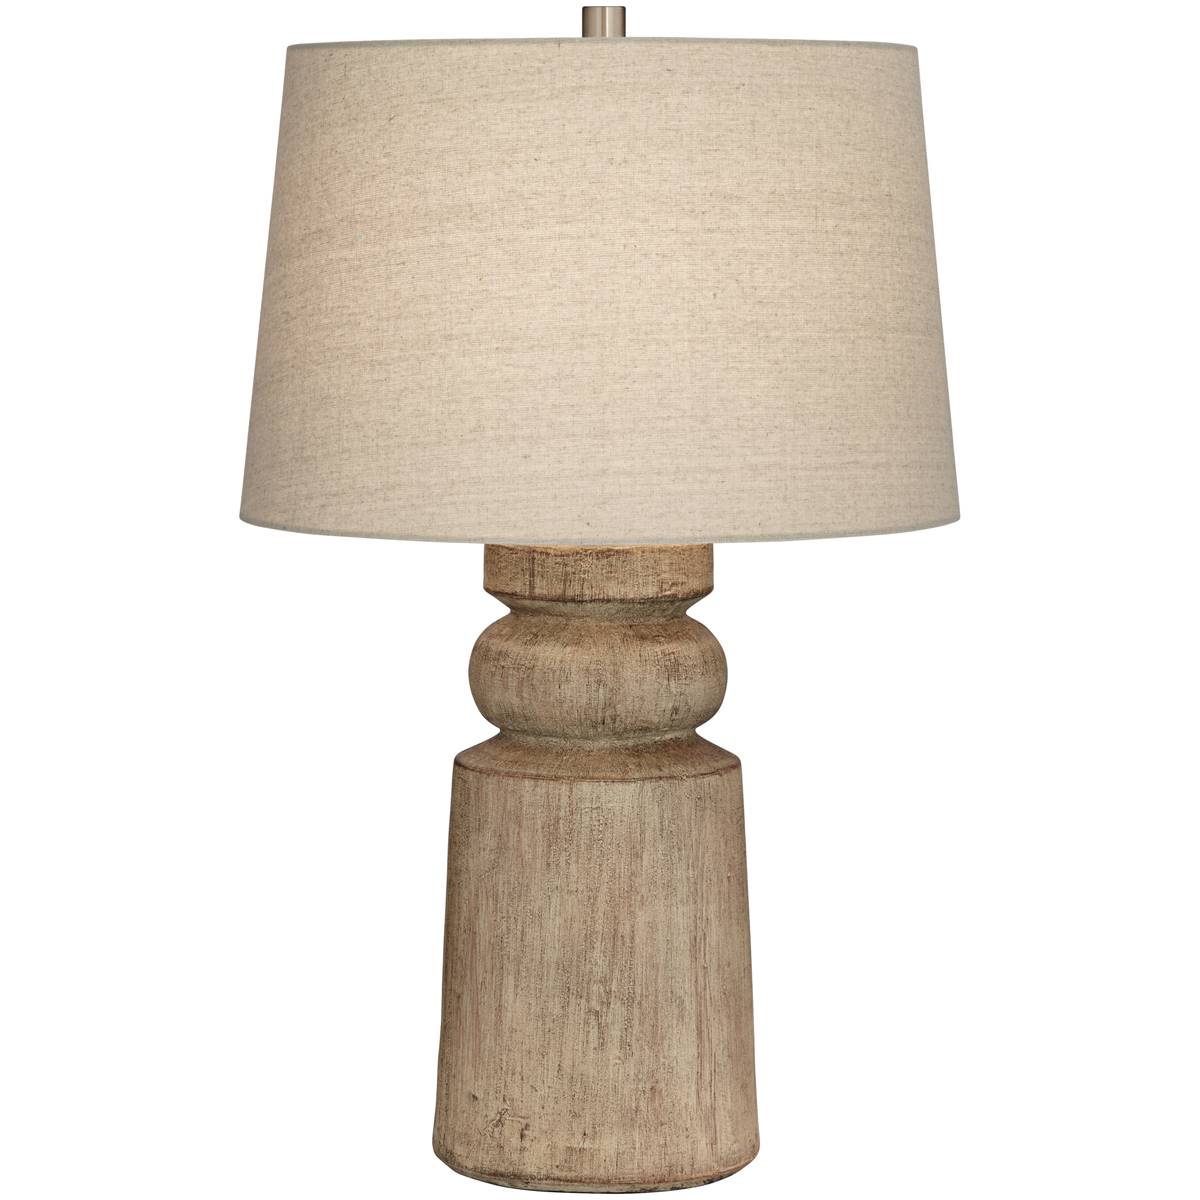 Pacific Coast Lighting Totem 27.5in. Natural Woods Table Lamp